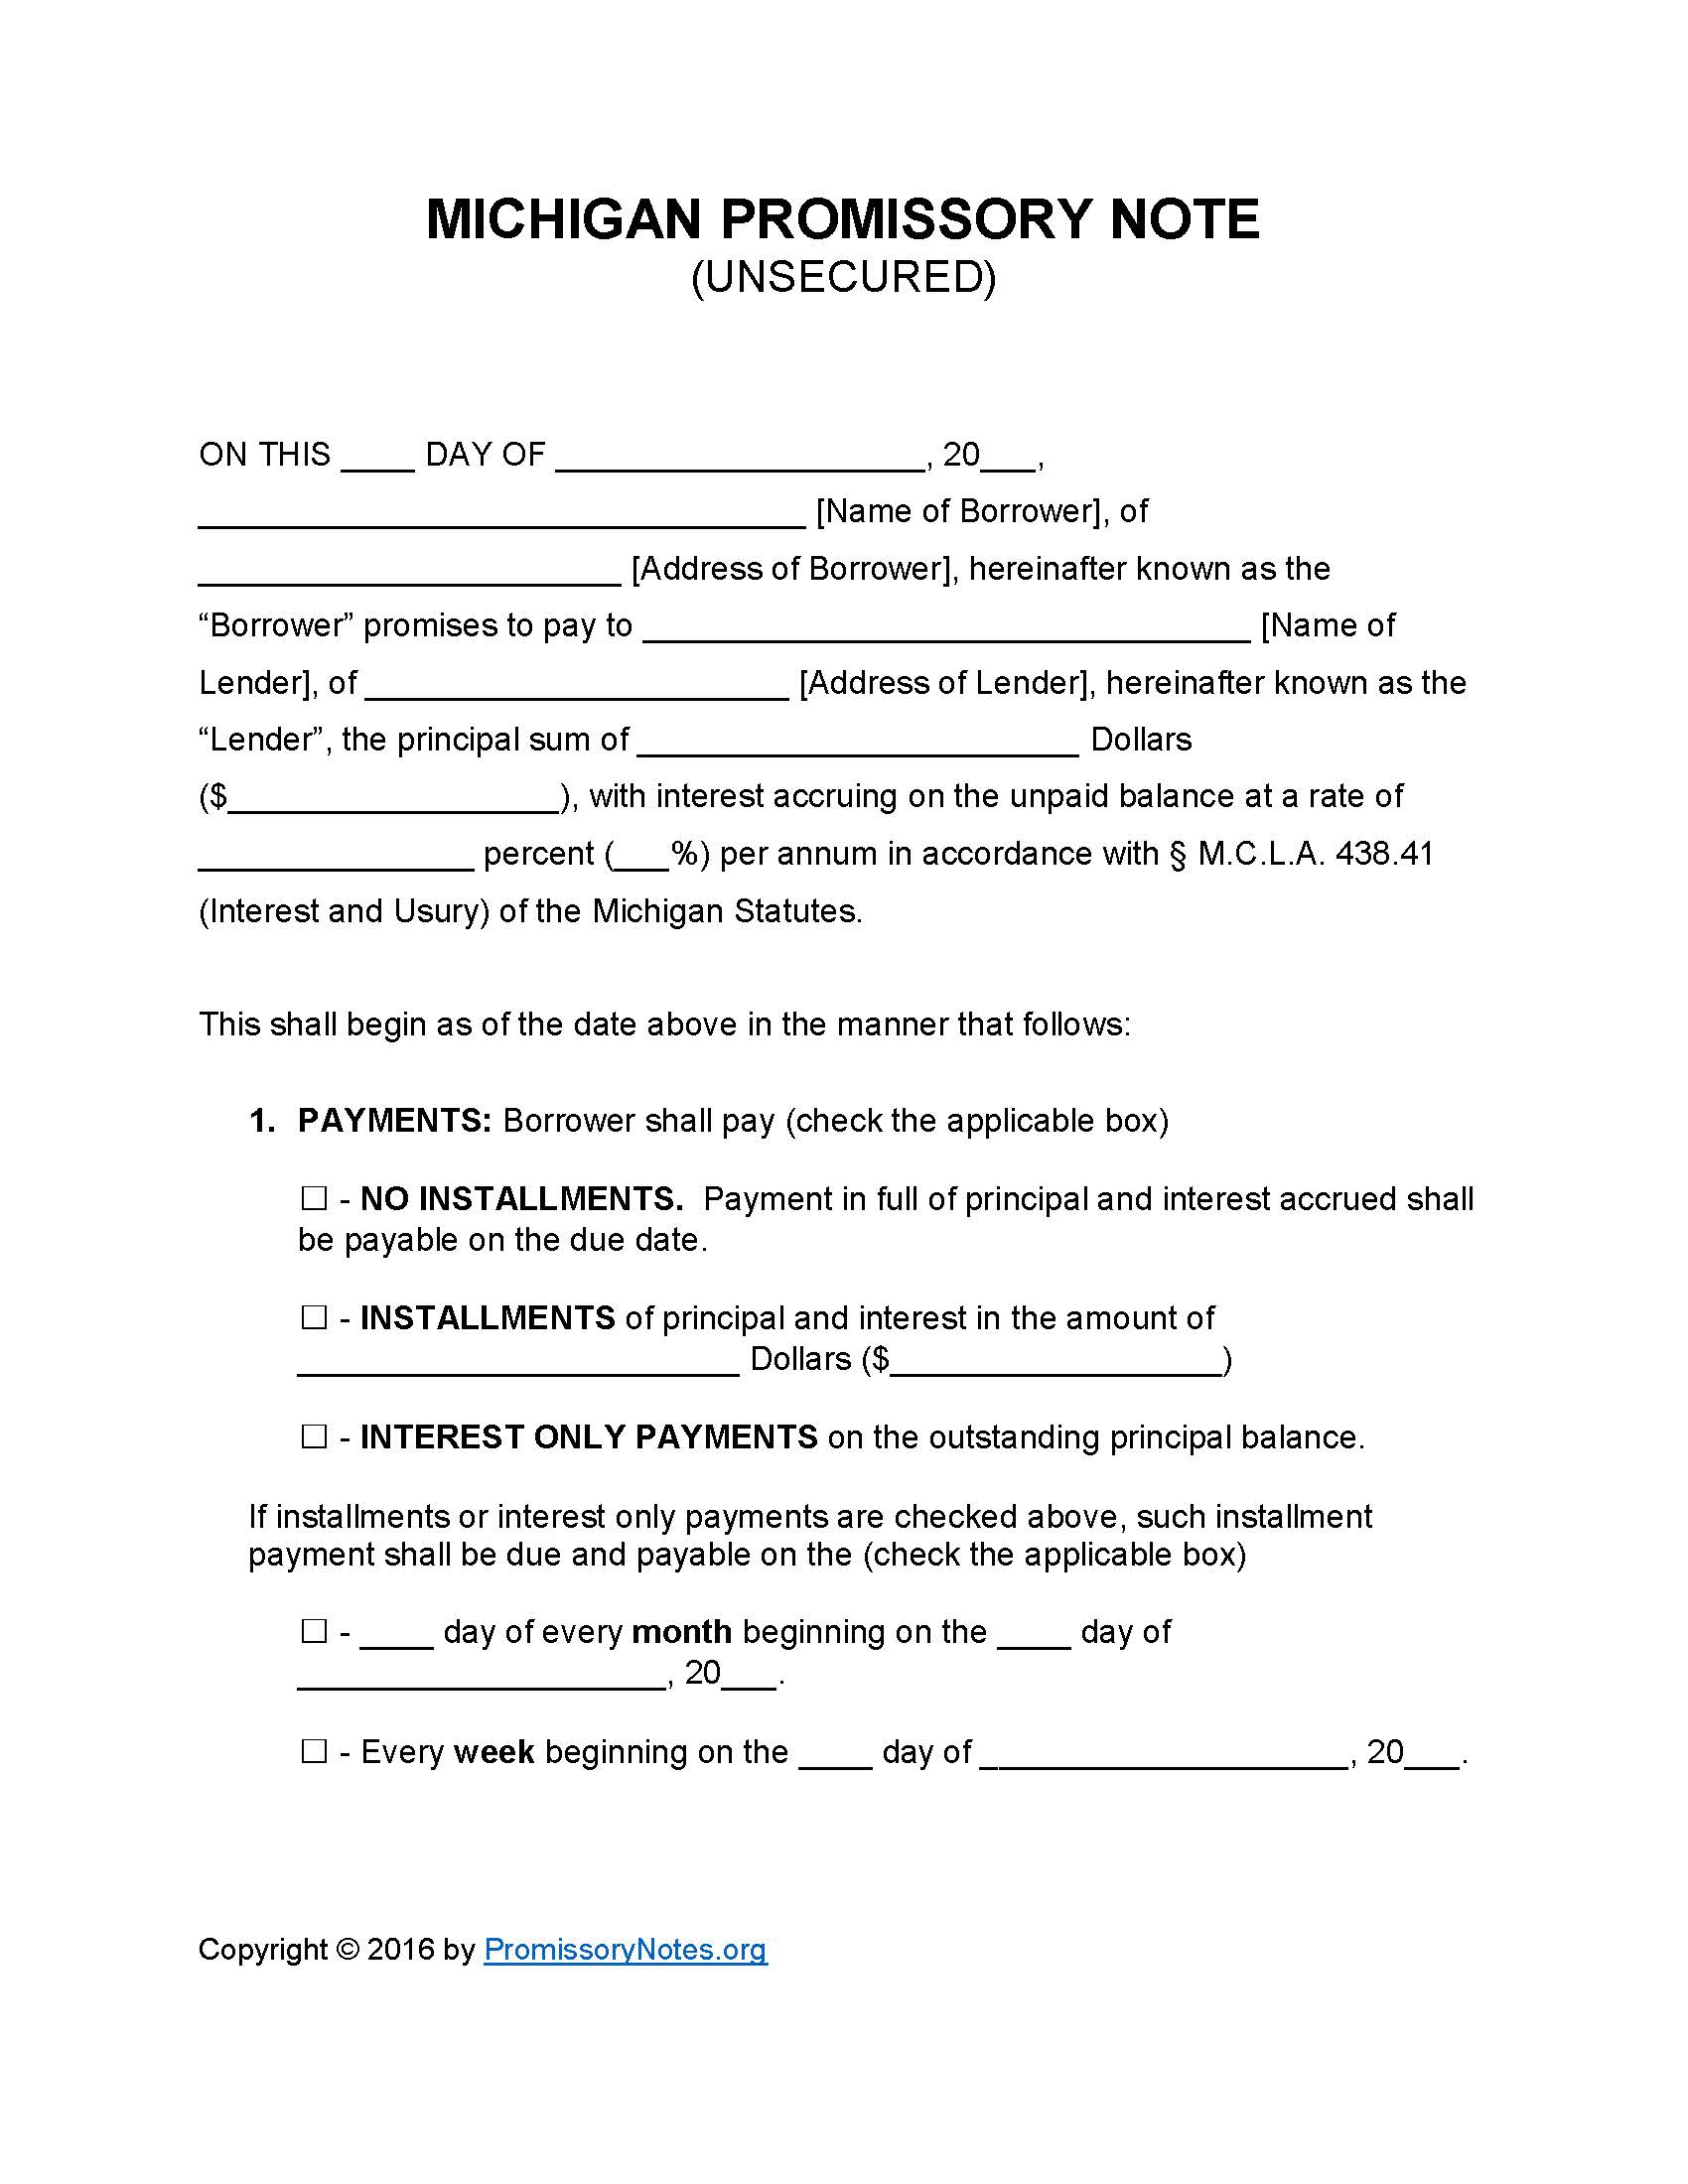 Michigan Unsecured Promissory Note Template - Promissory Notes Inside Promissory Note Loan Template